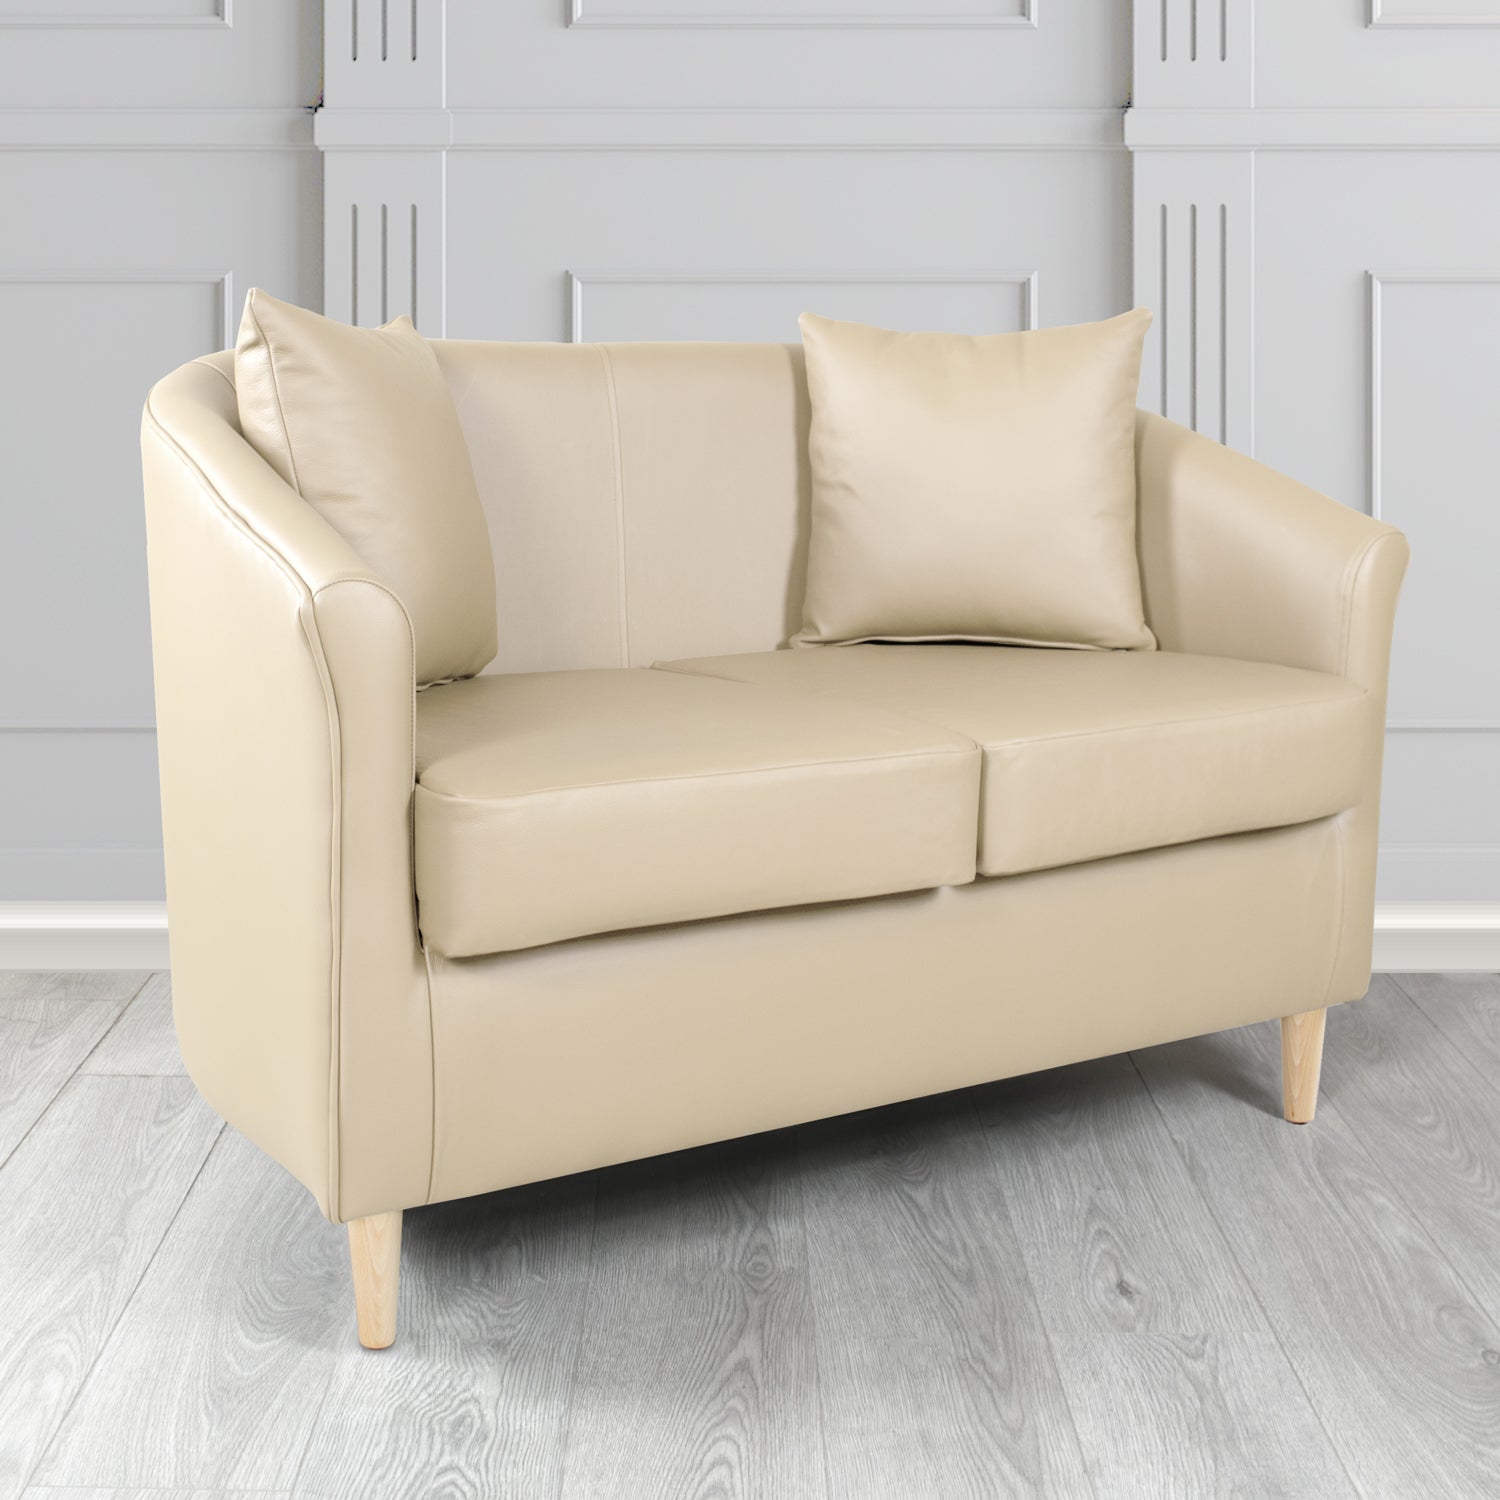 St Tropez Shelly Ivory Crib 5 Genuine Leather 2 Seater Tub Sofa with Scatter Cushions - The Tub Chair Shop